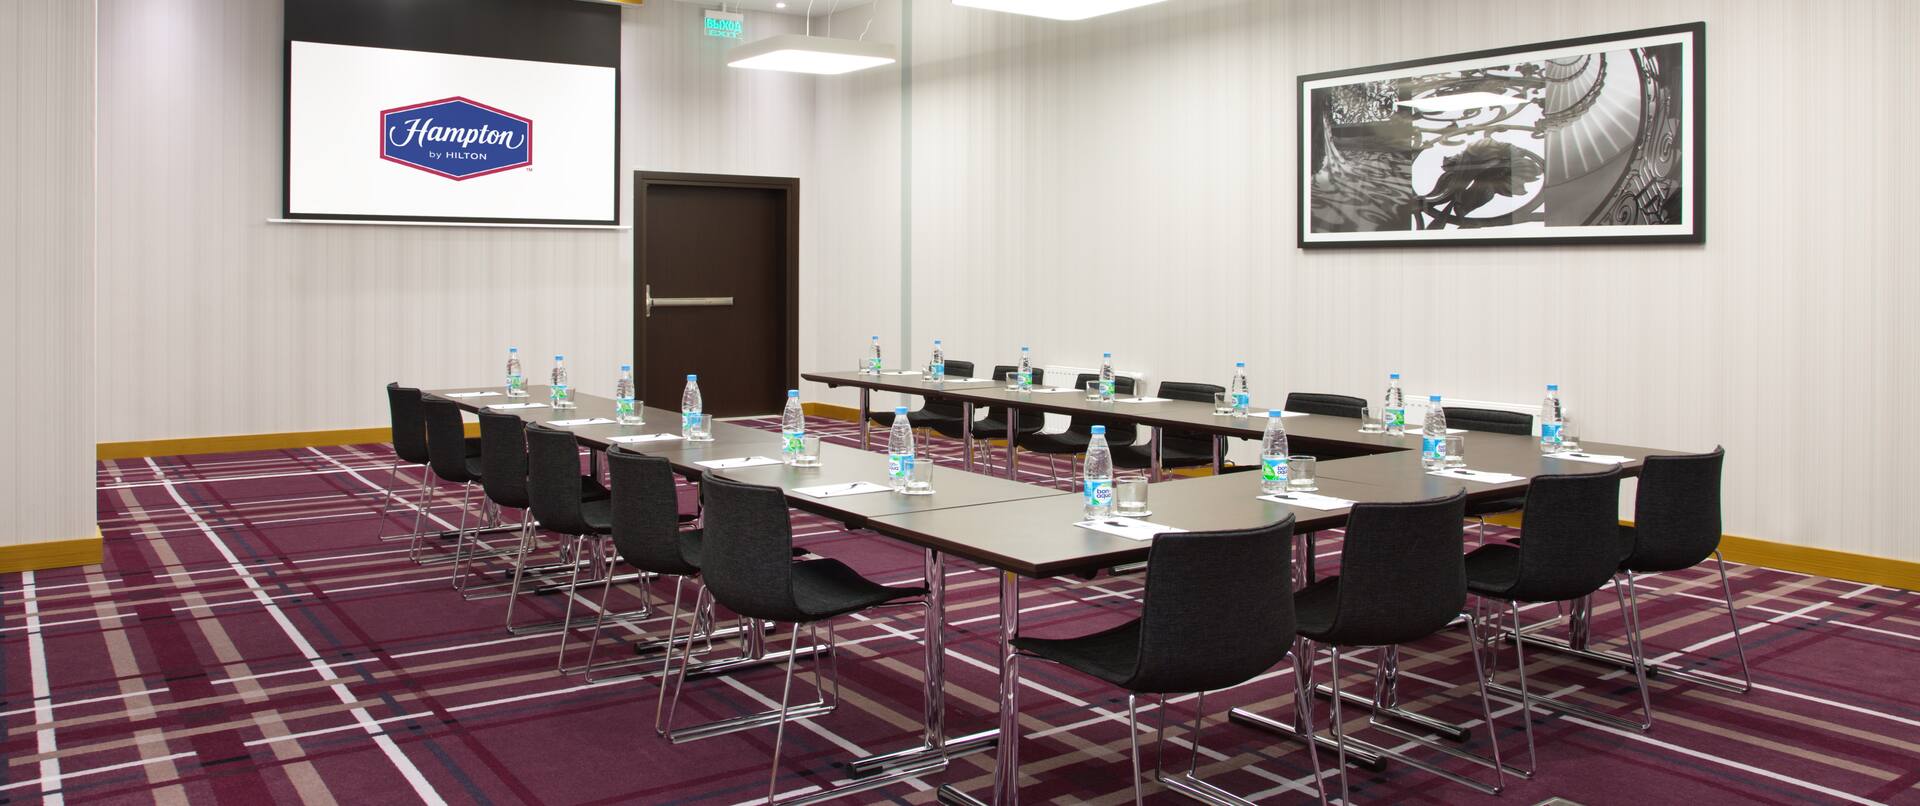 Meeting room with tables and chairs in u-shape